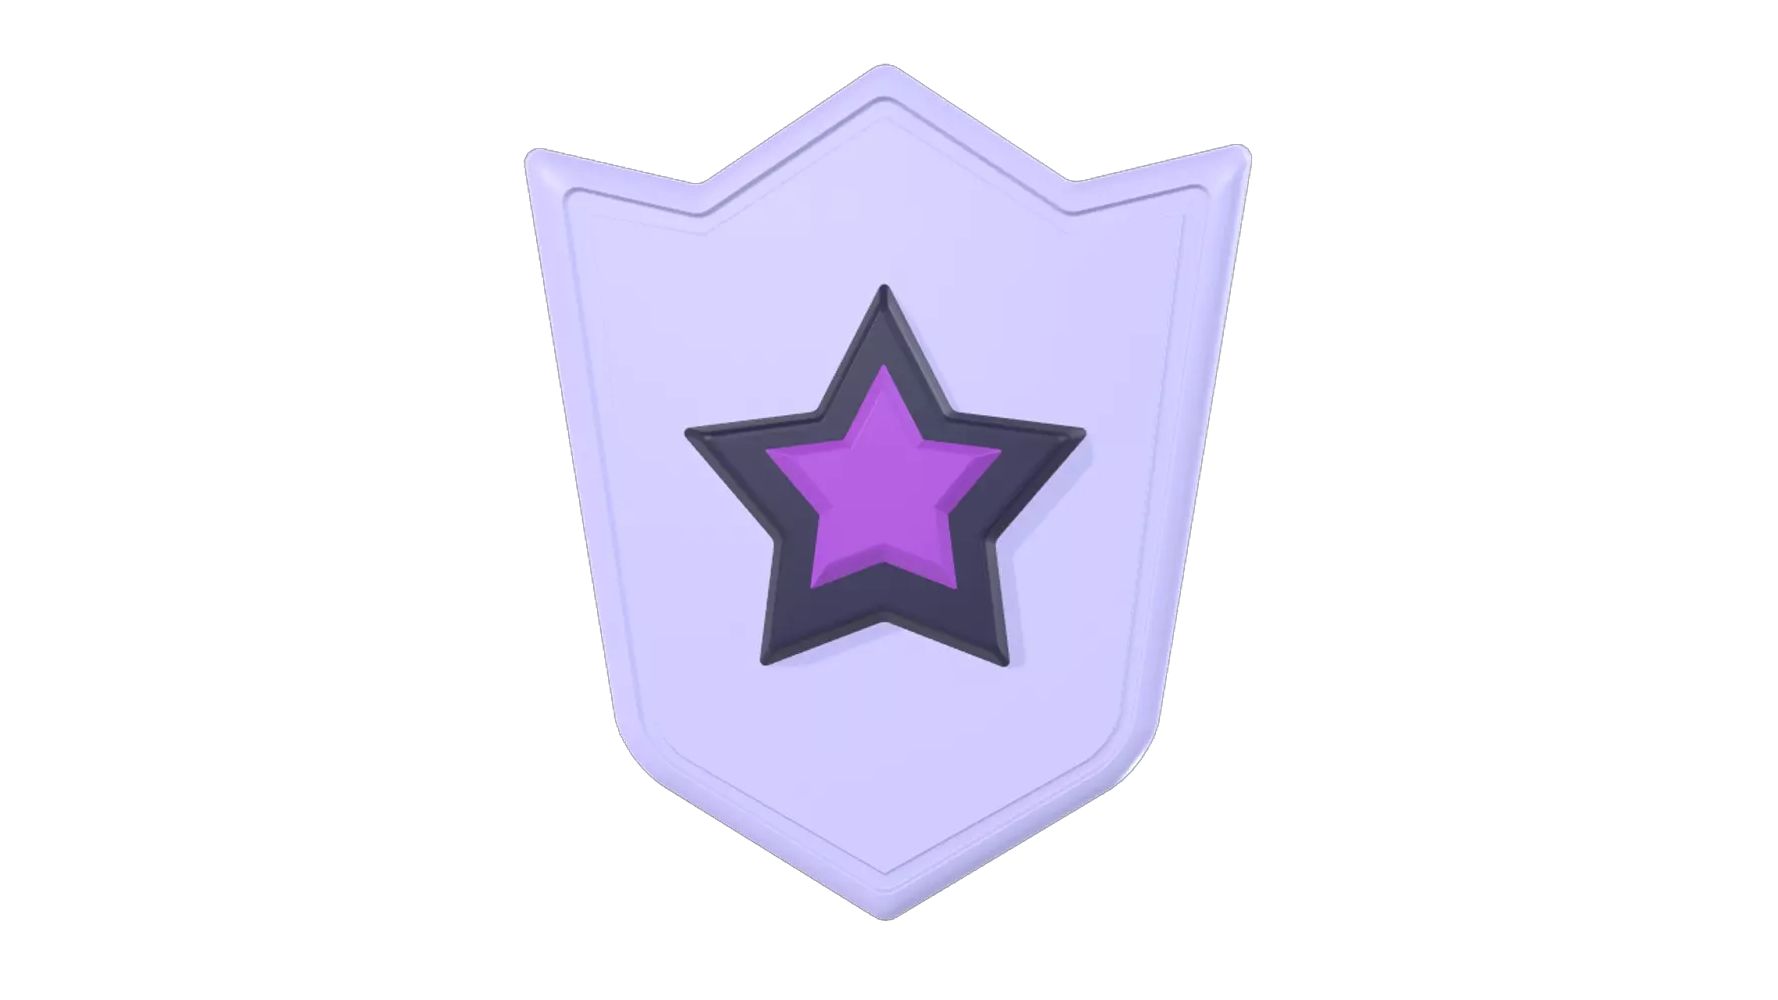 Star Shield 3D Graphic